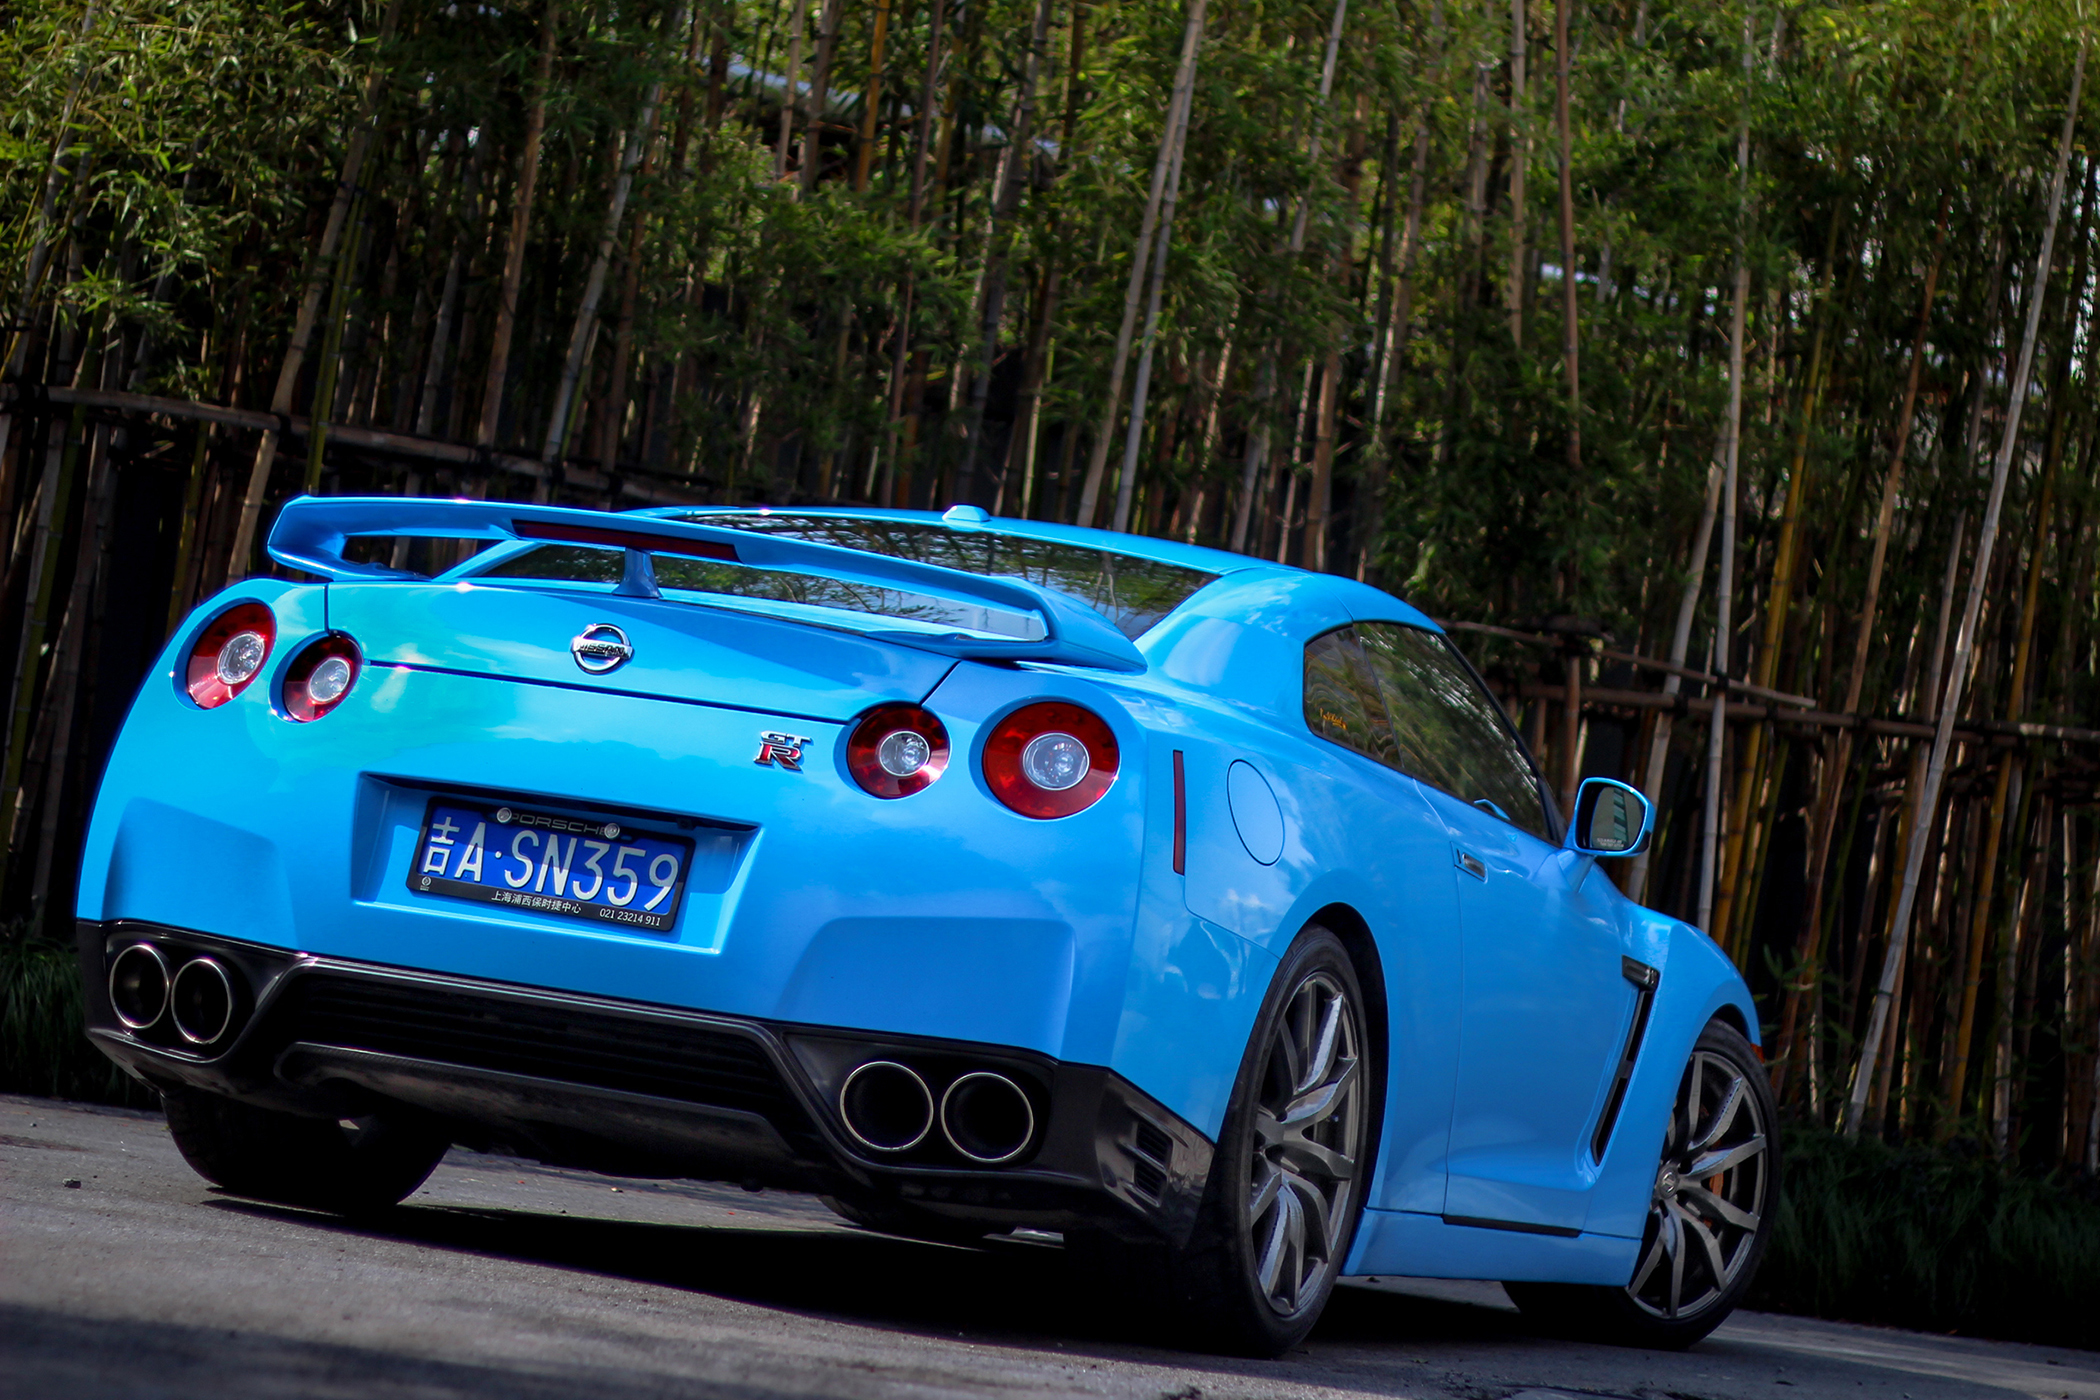 132983 Screensavers and Wallpapers Rear View for phone. Download blue, nissan, cars, back view, rear view, bumper, gtr, r35 pictures for free